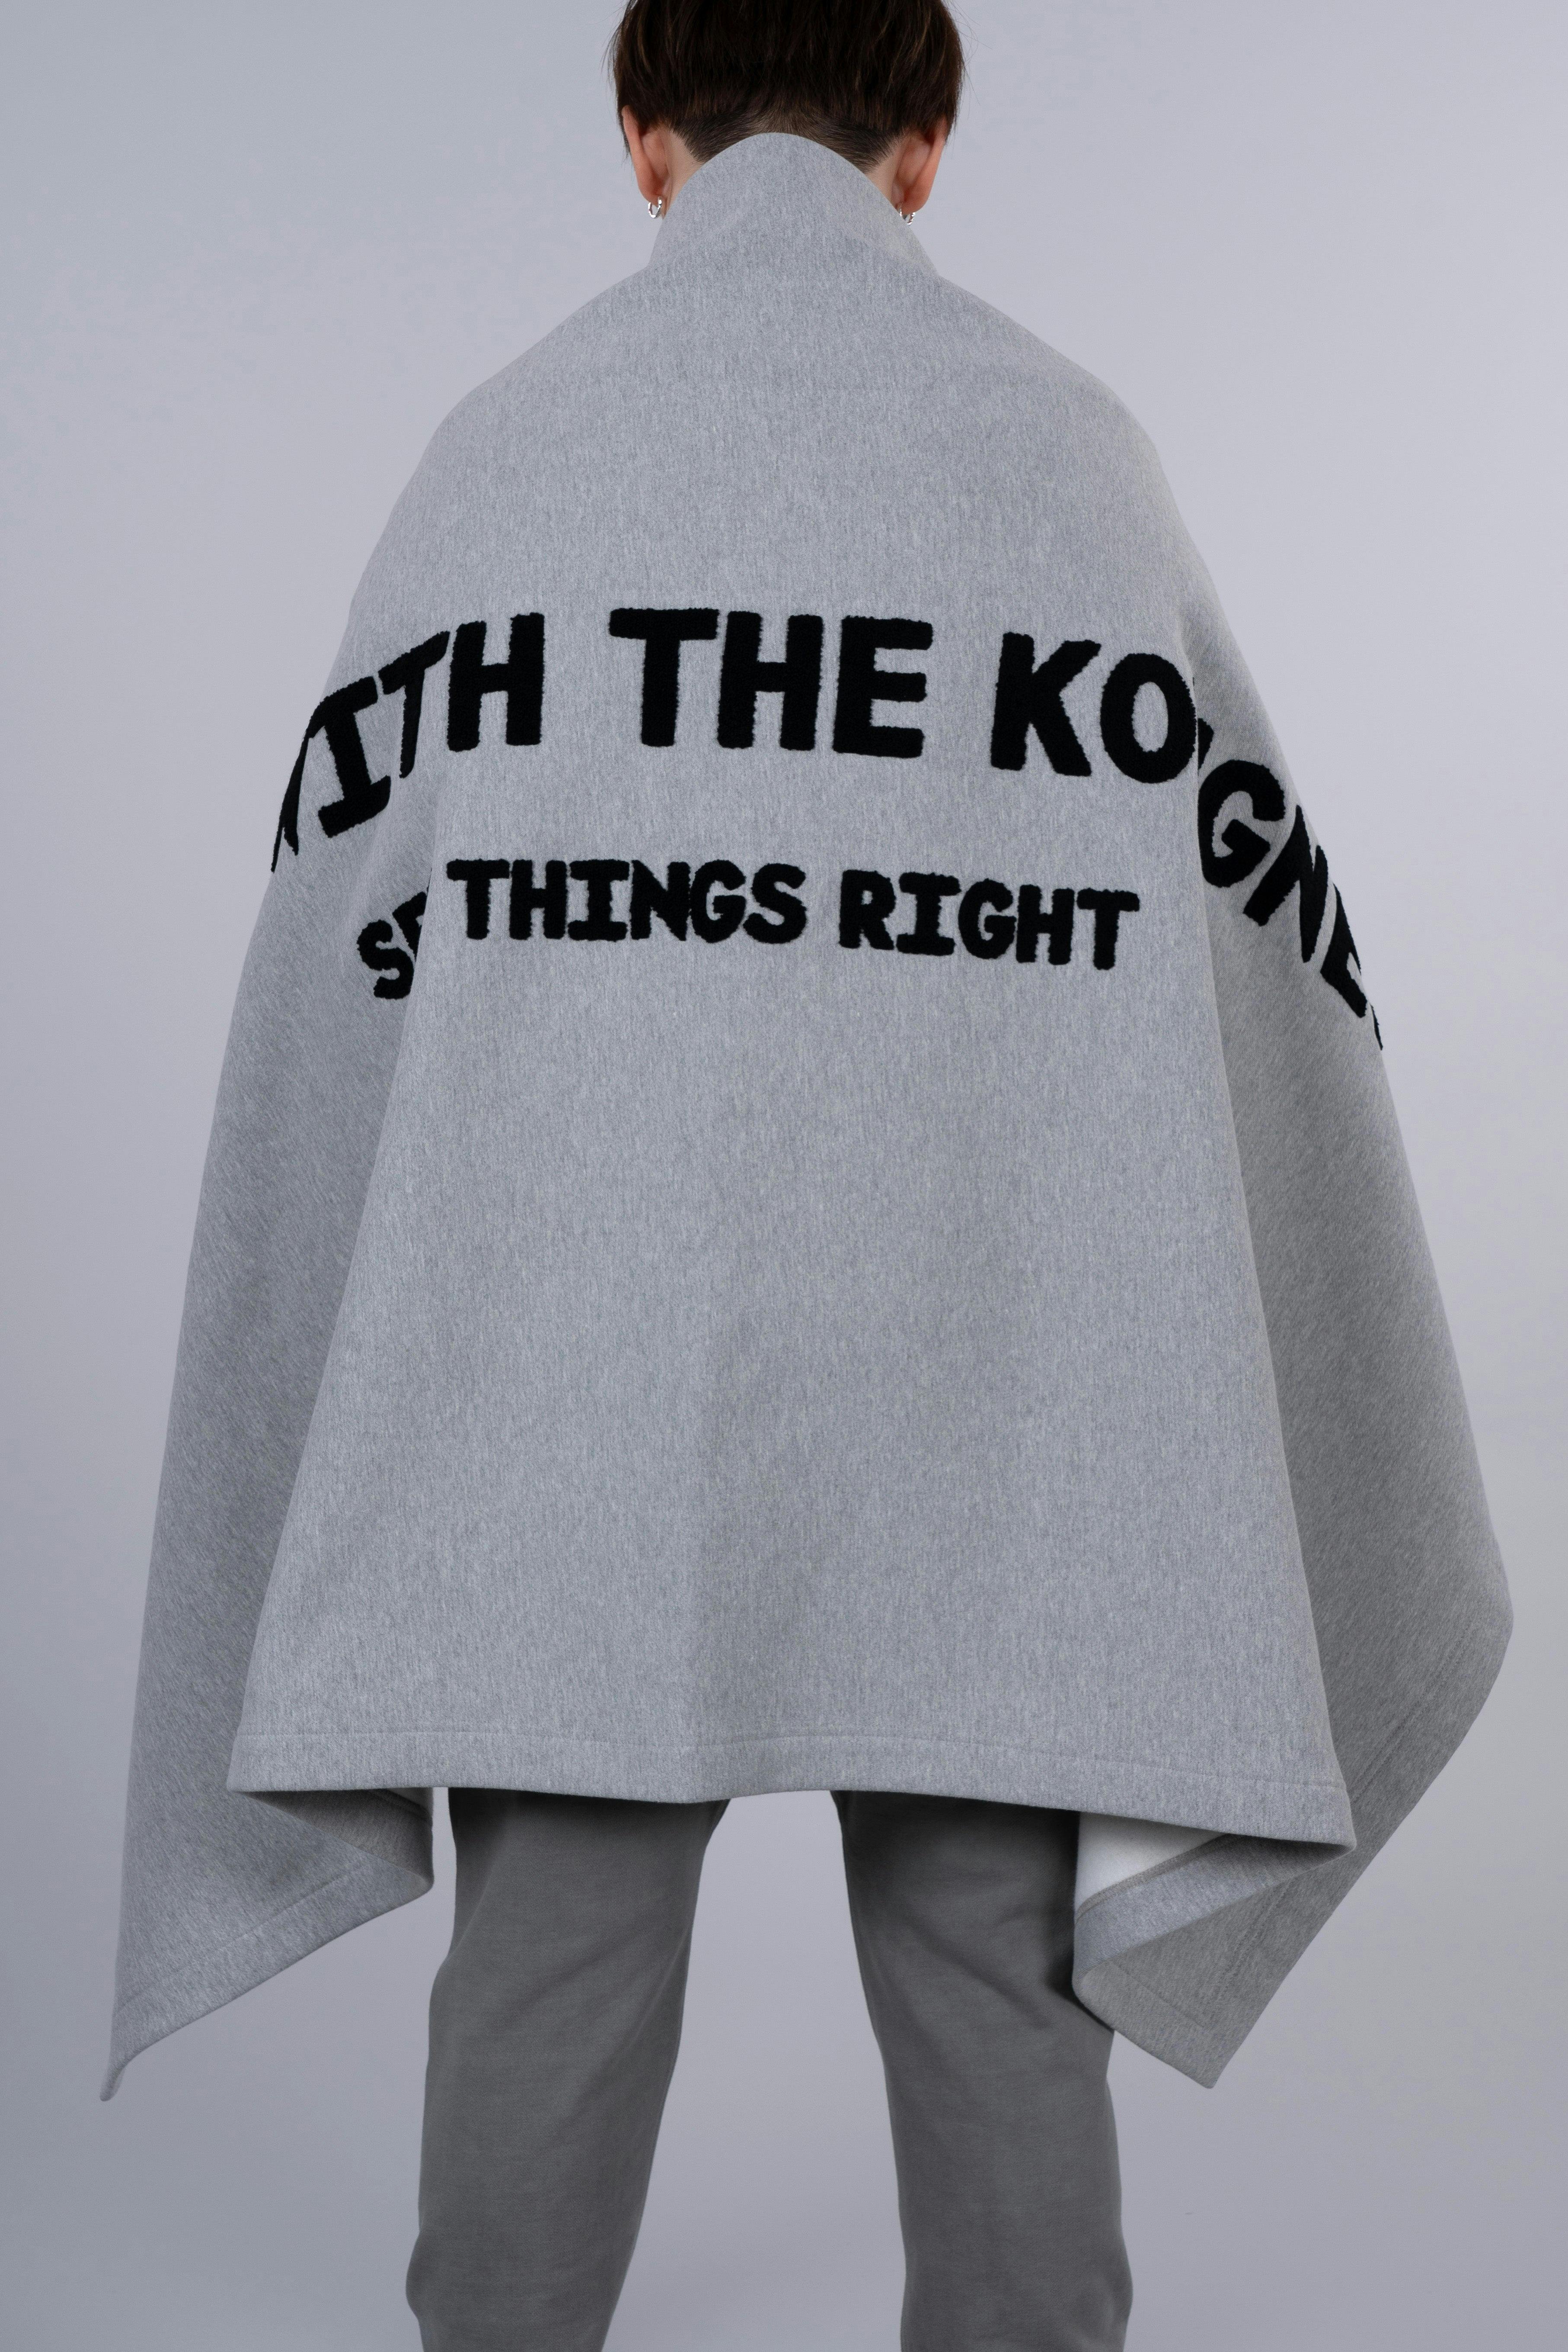 ˝SET THINGS RIGHT˝ Cotton Blanket - Grey